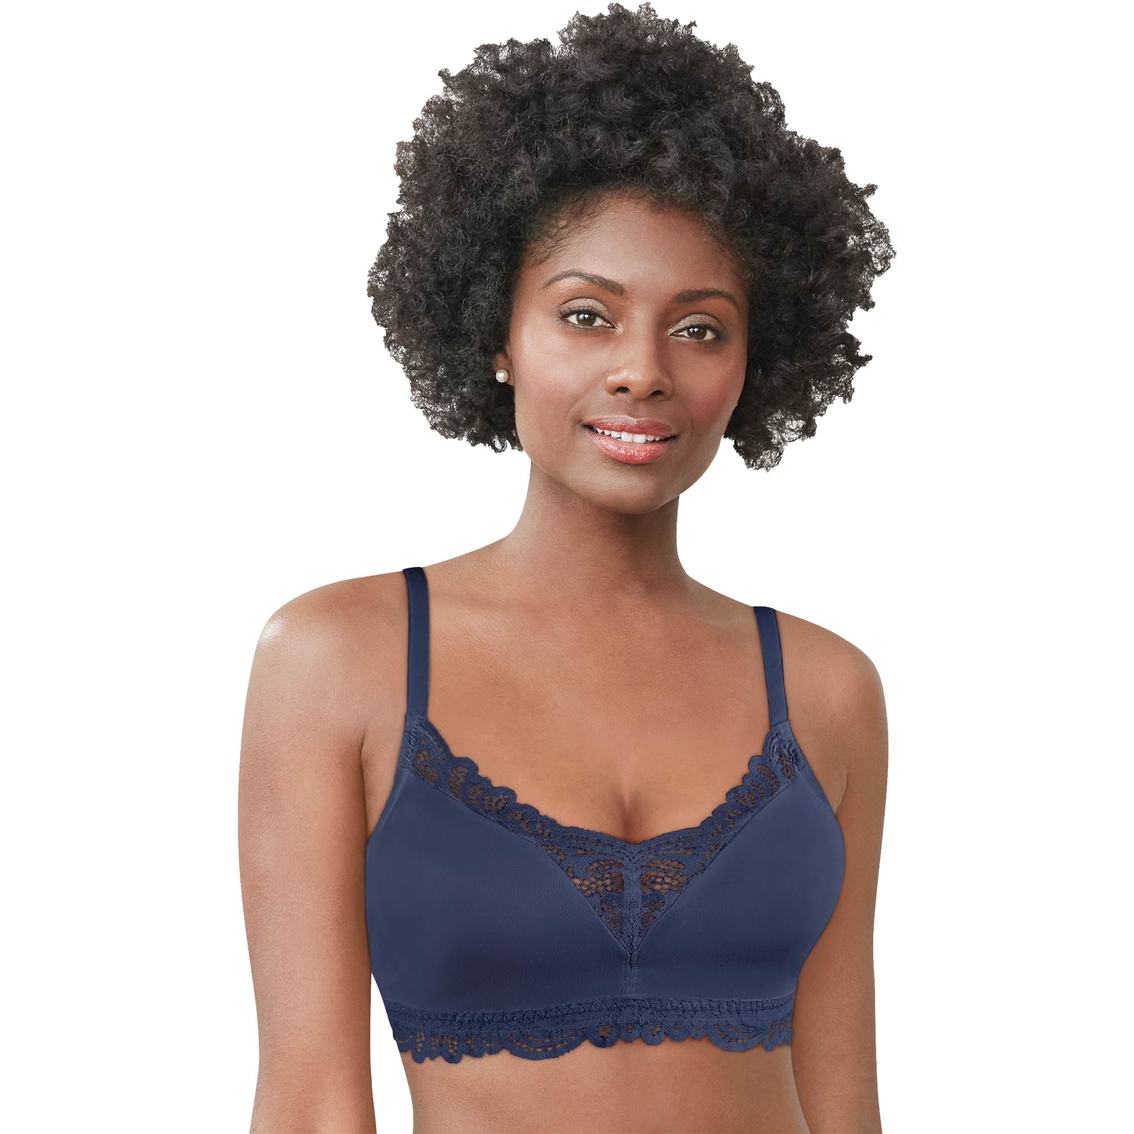 Bali Lace Desire Tailored With Lace Convertible Wirefree Bra, Bras, Clothing & Accessories